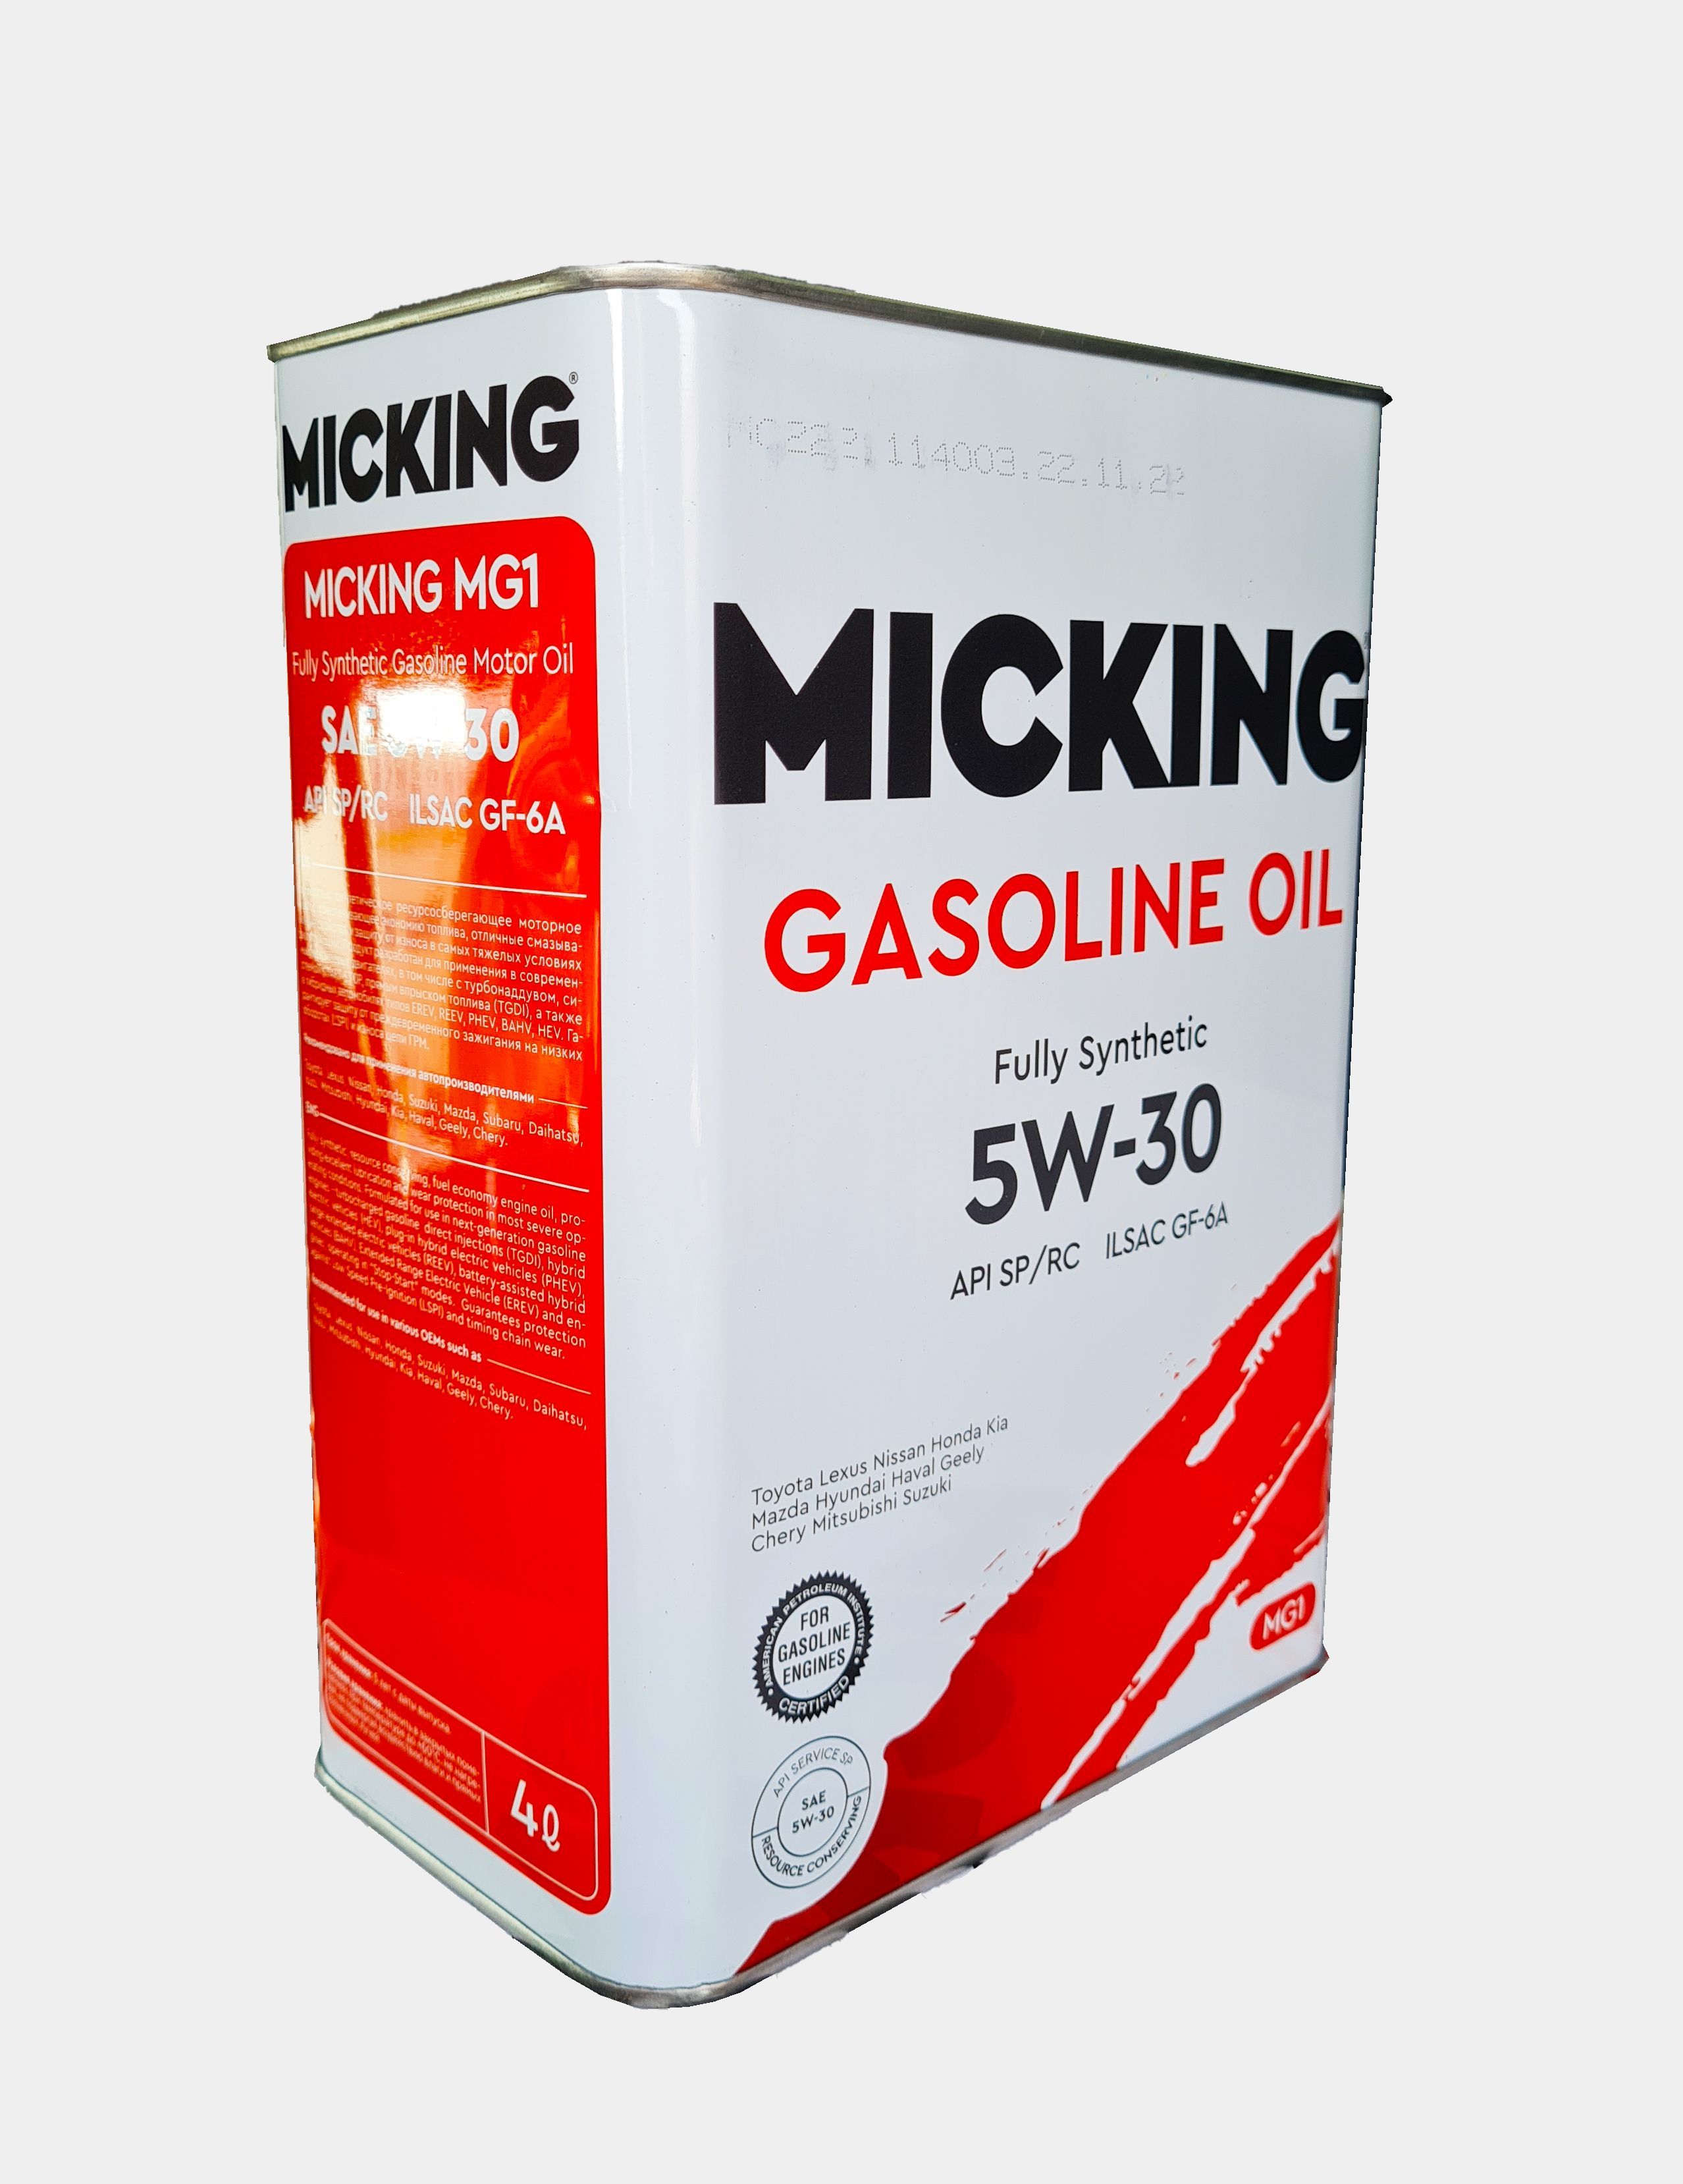 Масло micking 5w30. Micking gasoline Oil mg1 5w30 SP/RC. Масло моторное Micking gasoline fully-Synthetic 5w-30 синтетическое 4 л. Micking 5w30 синтетика отзывы.